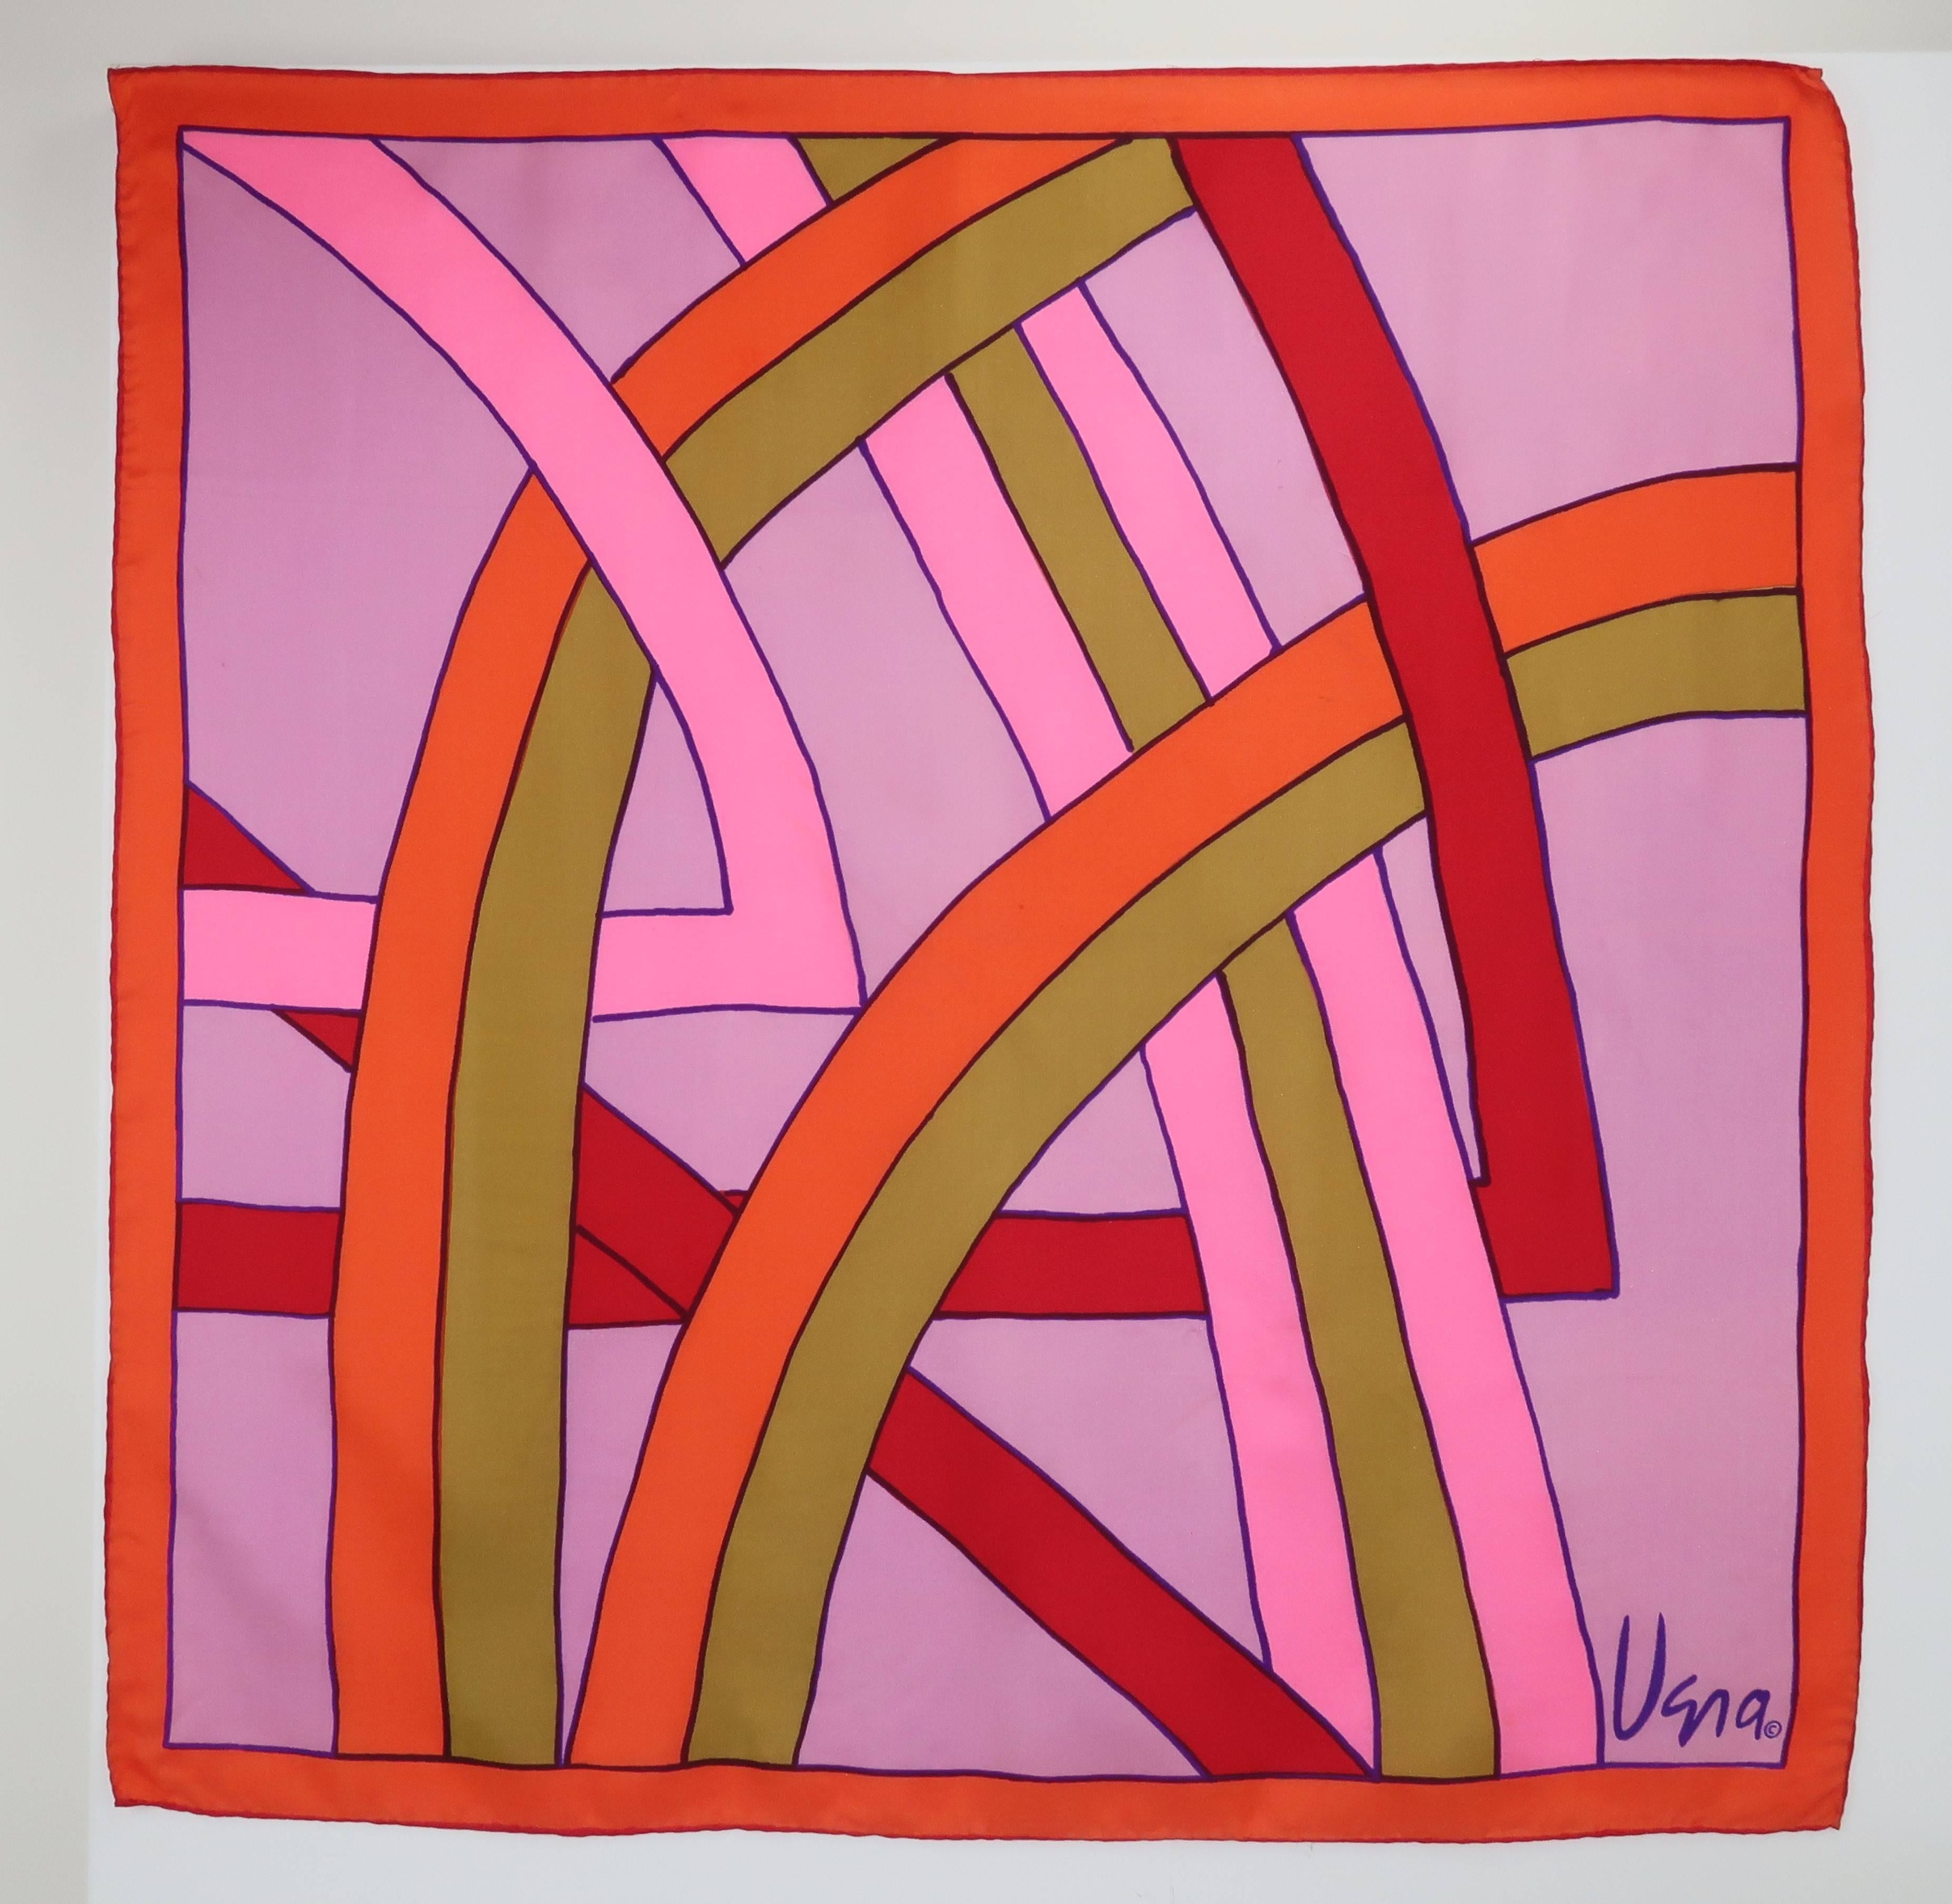 Vera Neumann's talent as a colorist is evident in this pop mod silk scarf incorporating graphic hues of pink, red, green, orange and lilac.  The colors intersect in a modernist pattern reminiscent of the minimalist style of Frank Stella's artwork